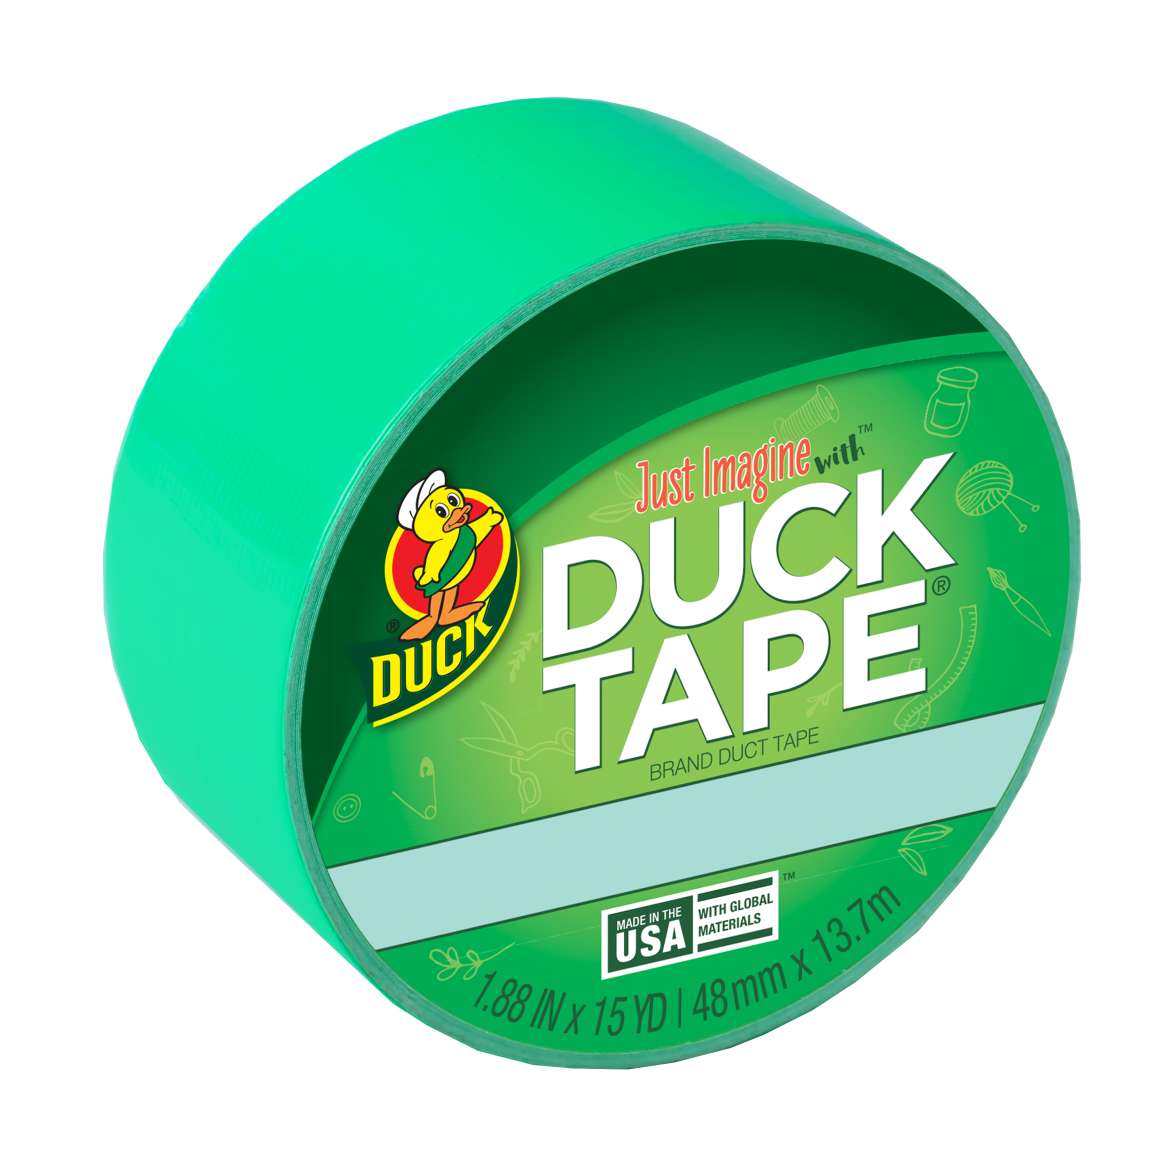 Color Duck Tape® Brand Duct Tape - Fluorescent Mint, 1.88 in. x 15 yd.